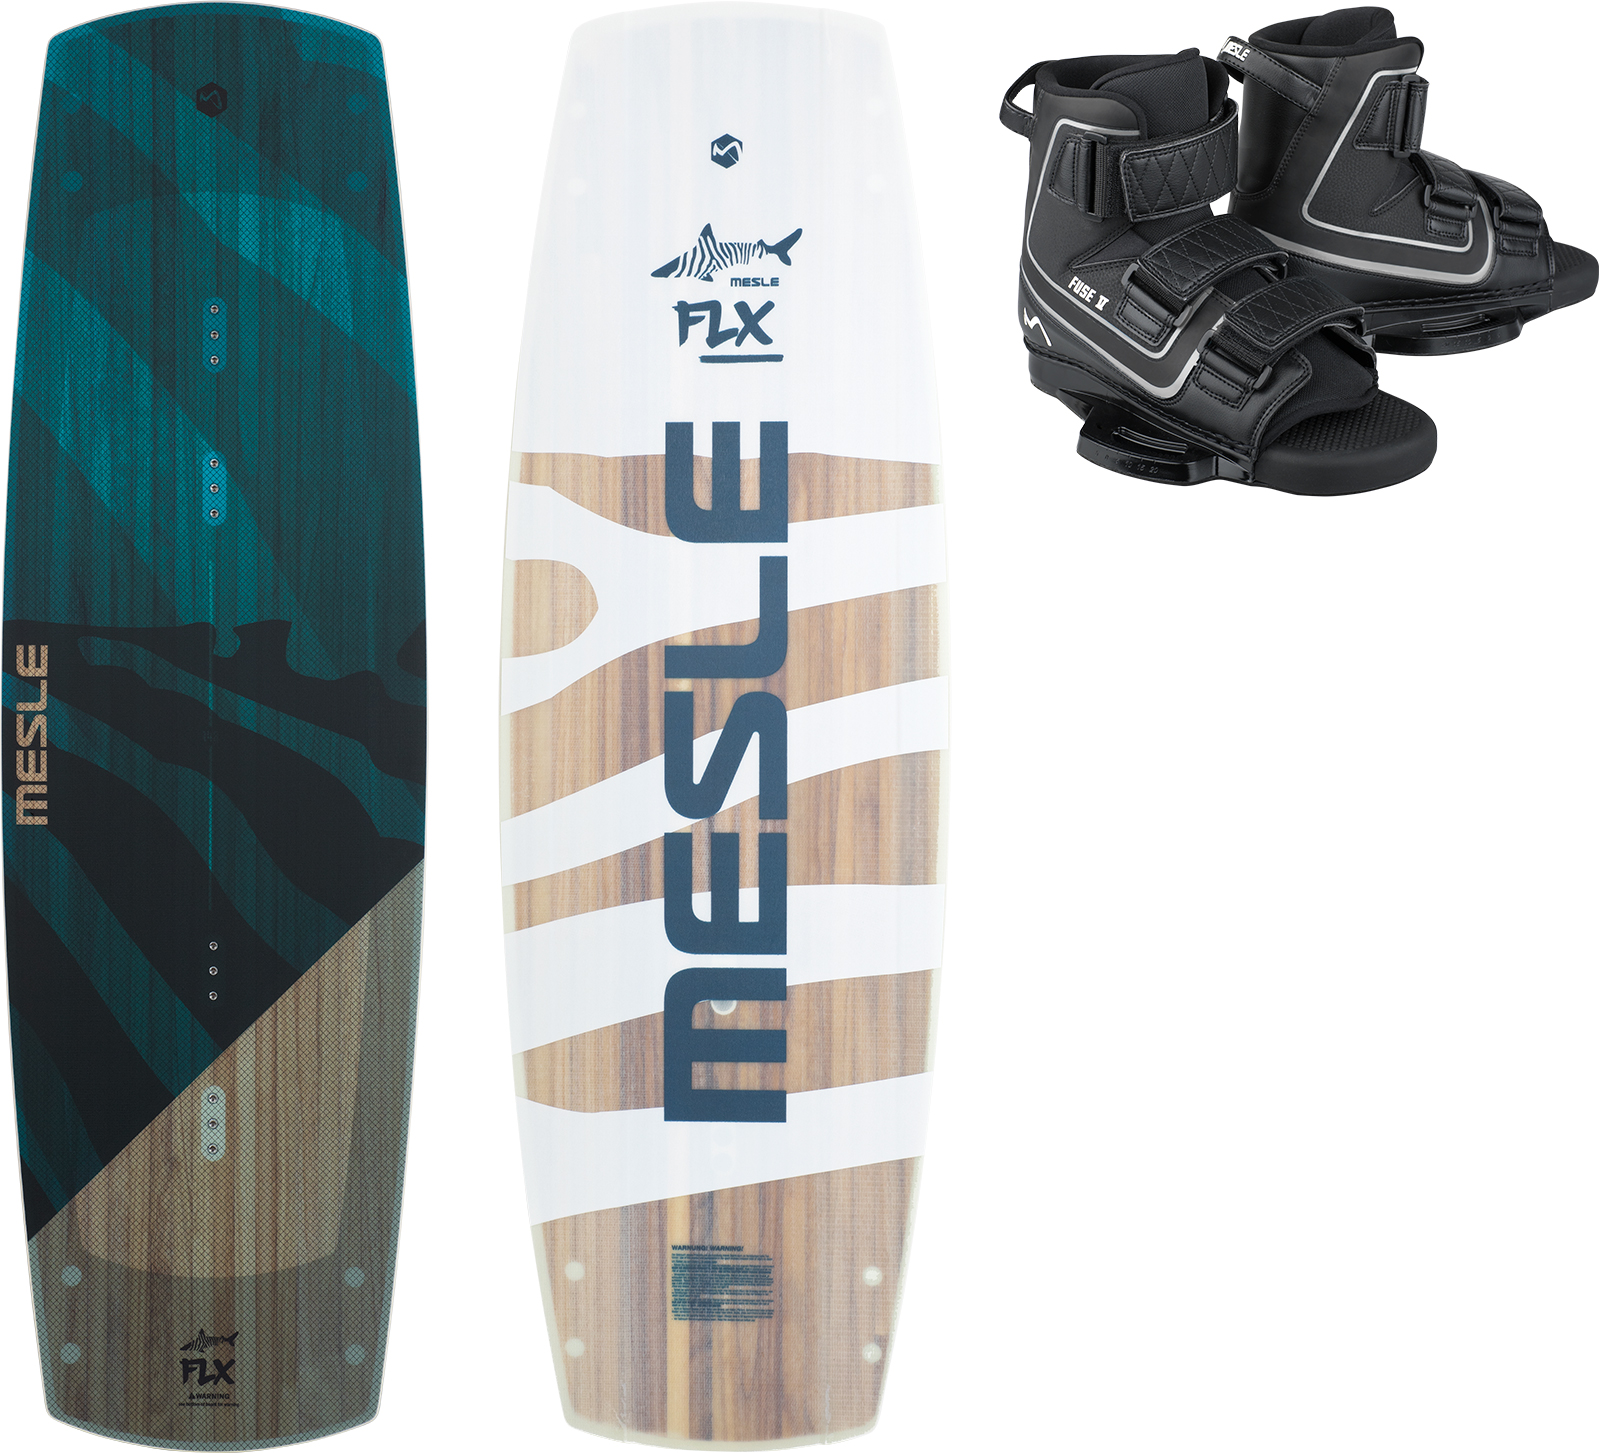 MESLE Wakeboard Set FLX II mit Fuse Bindung, Cable Park Pro Flex Board für Obstacles